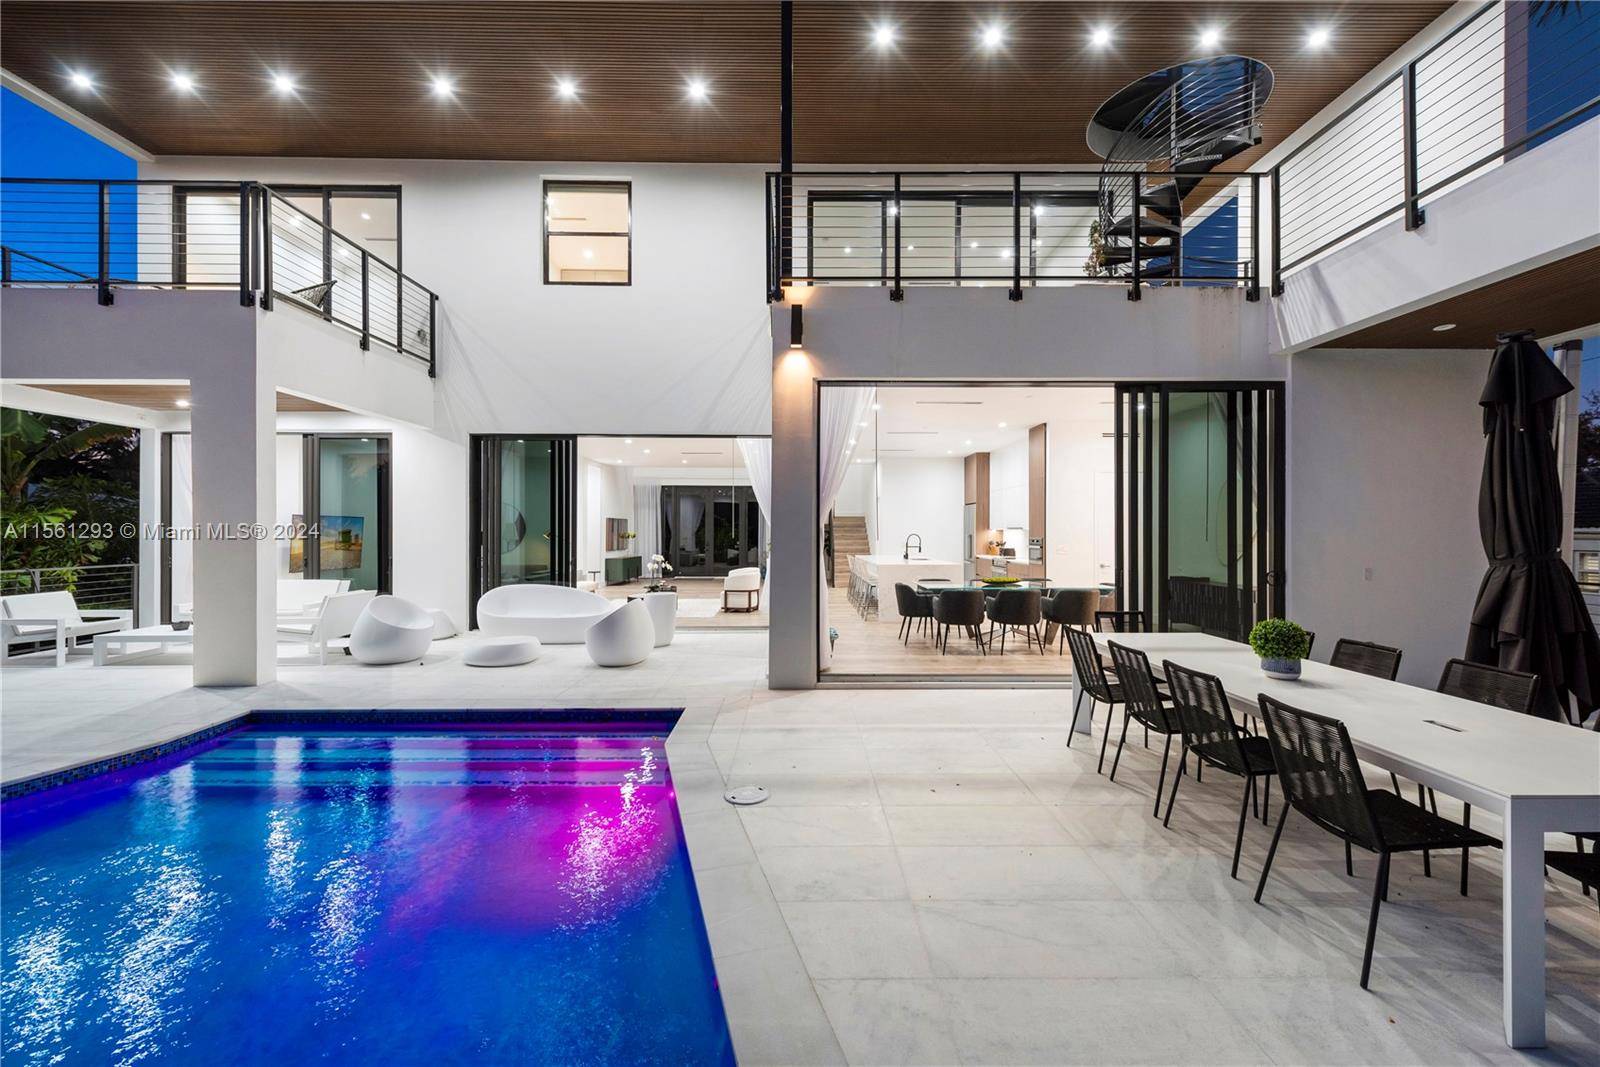 This Brand new elegant home located in the heart of Miami Shores was developed with elegance, style and practicality in mind.